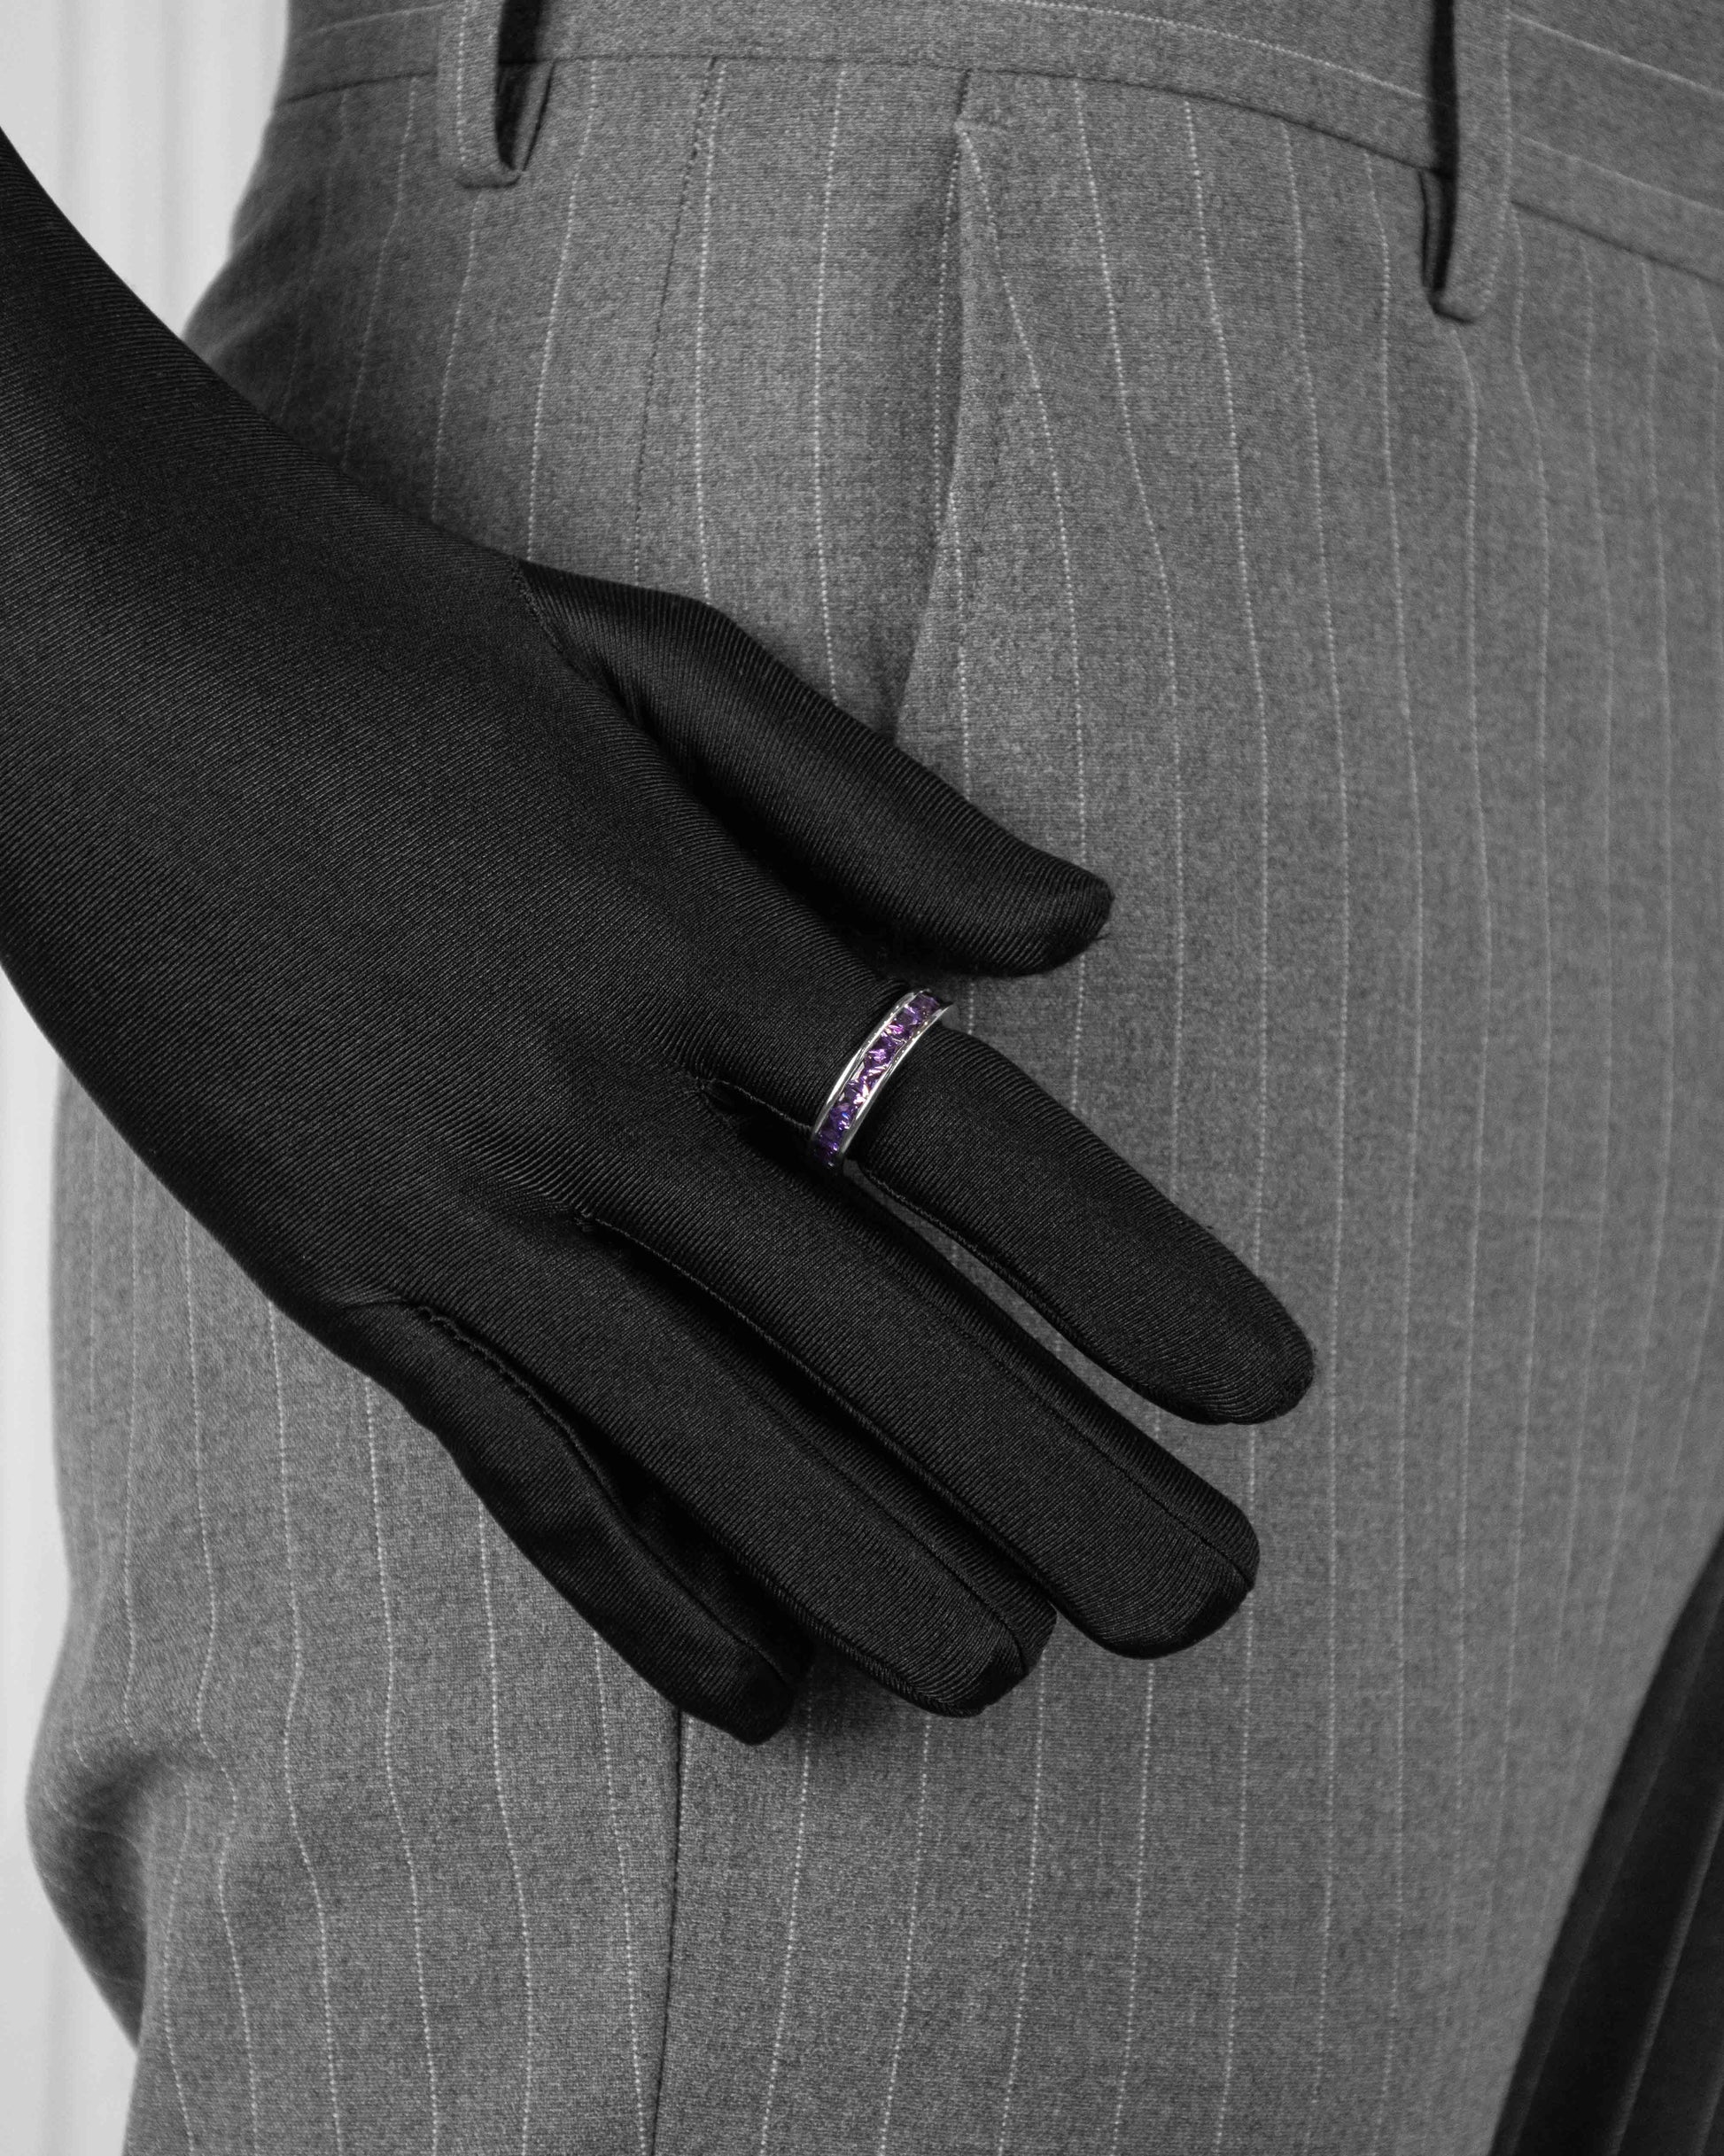 man with black suit wearing ring with purple stones